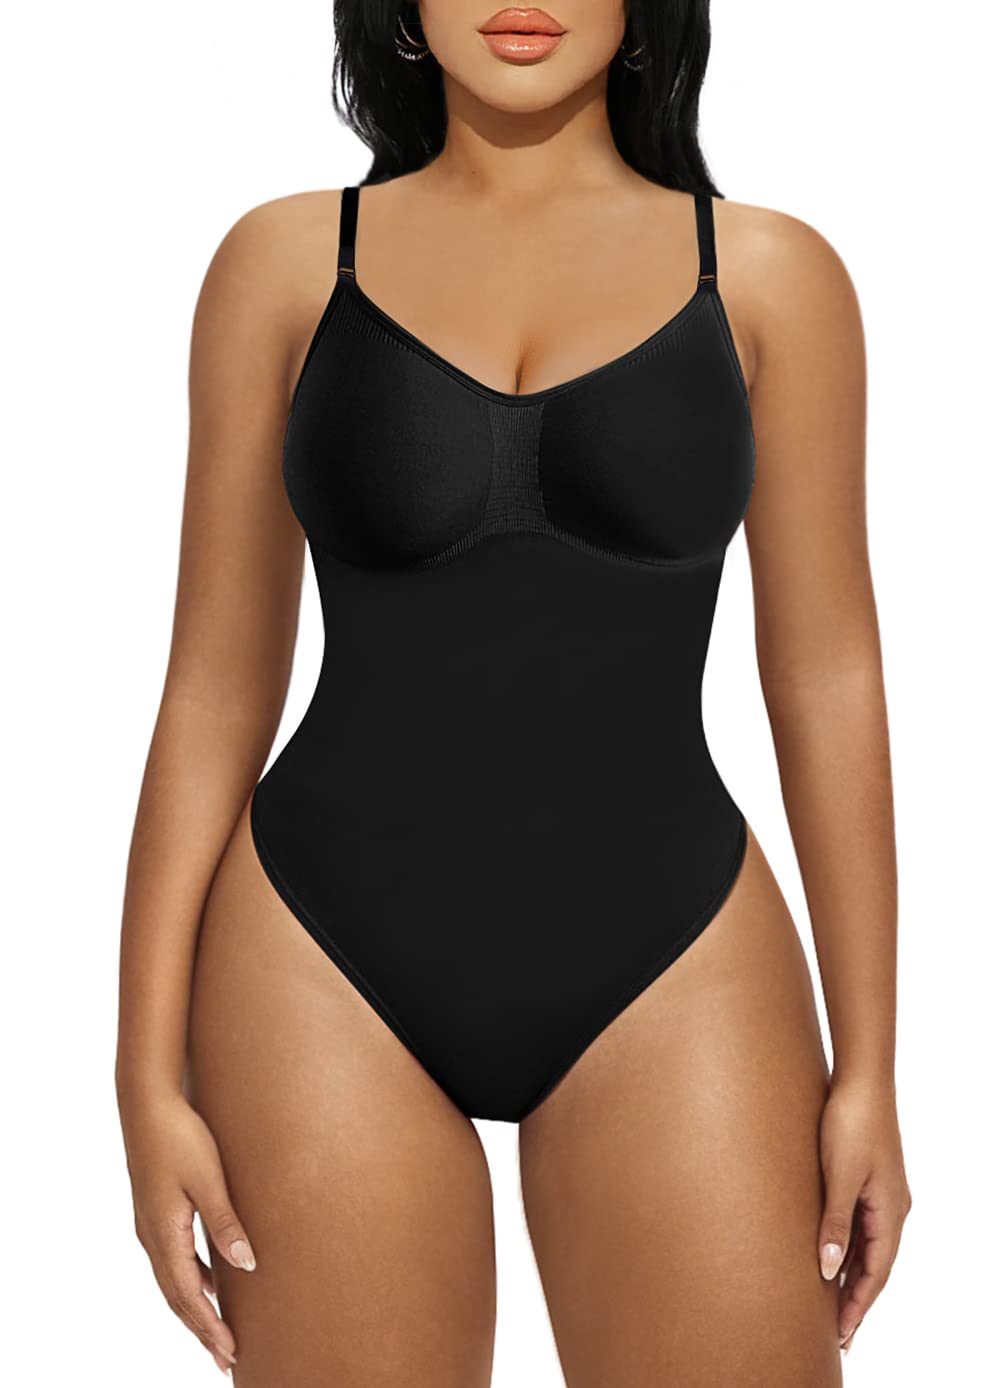 Womens Seamless Waist Tummy Control Low Back Shapewear Bodysuit With Thong  For Slimming, Sculpting, And Belly Trimming Compress X0902 From  Us_mississippi, $8.12